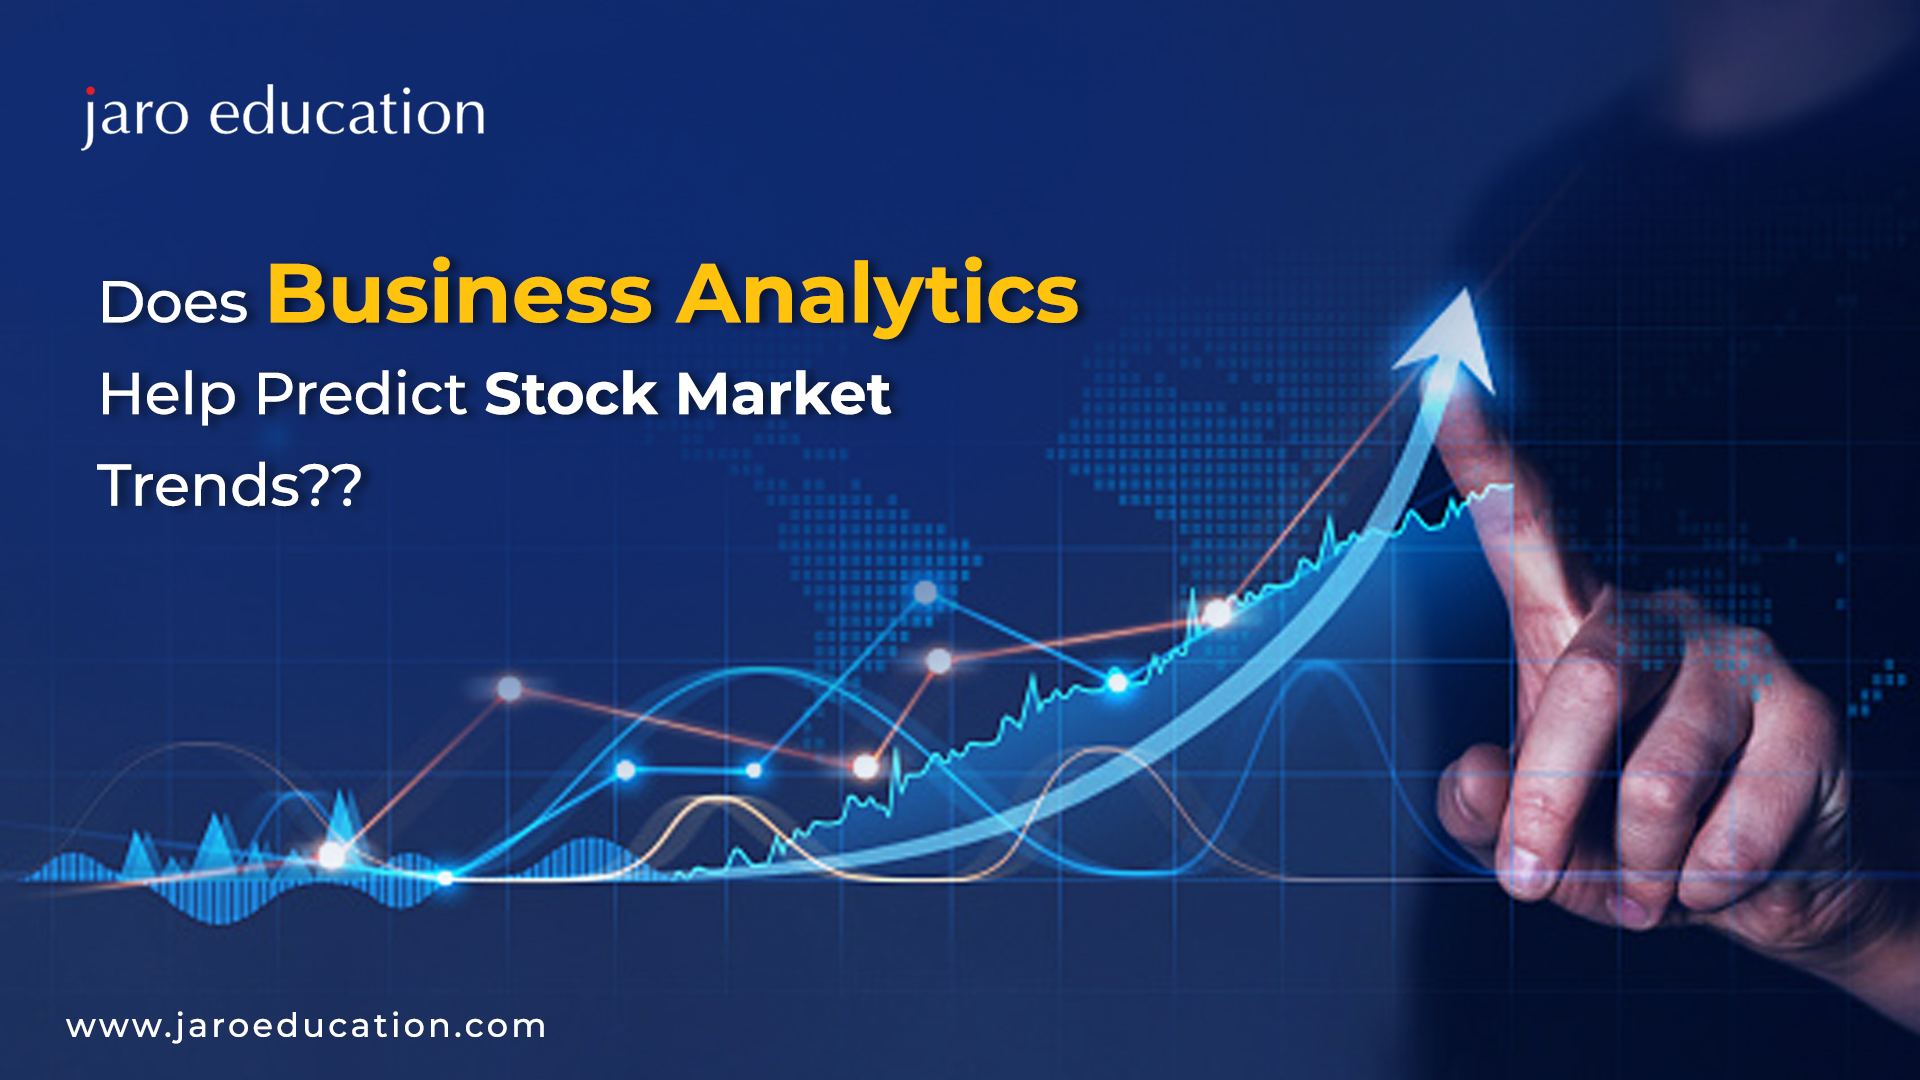 Understanding the role of business analytics in stock market predictions